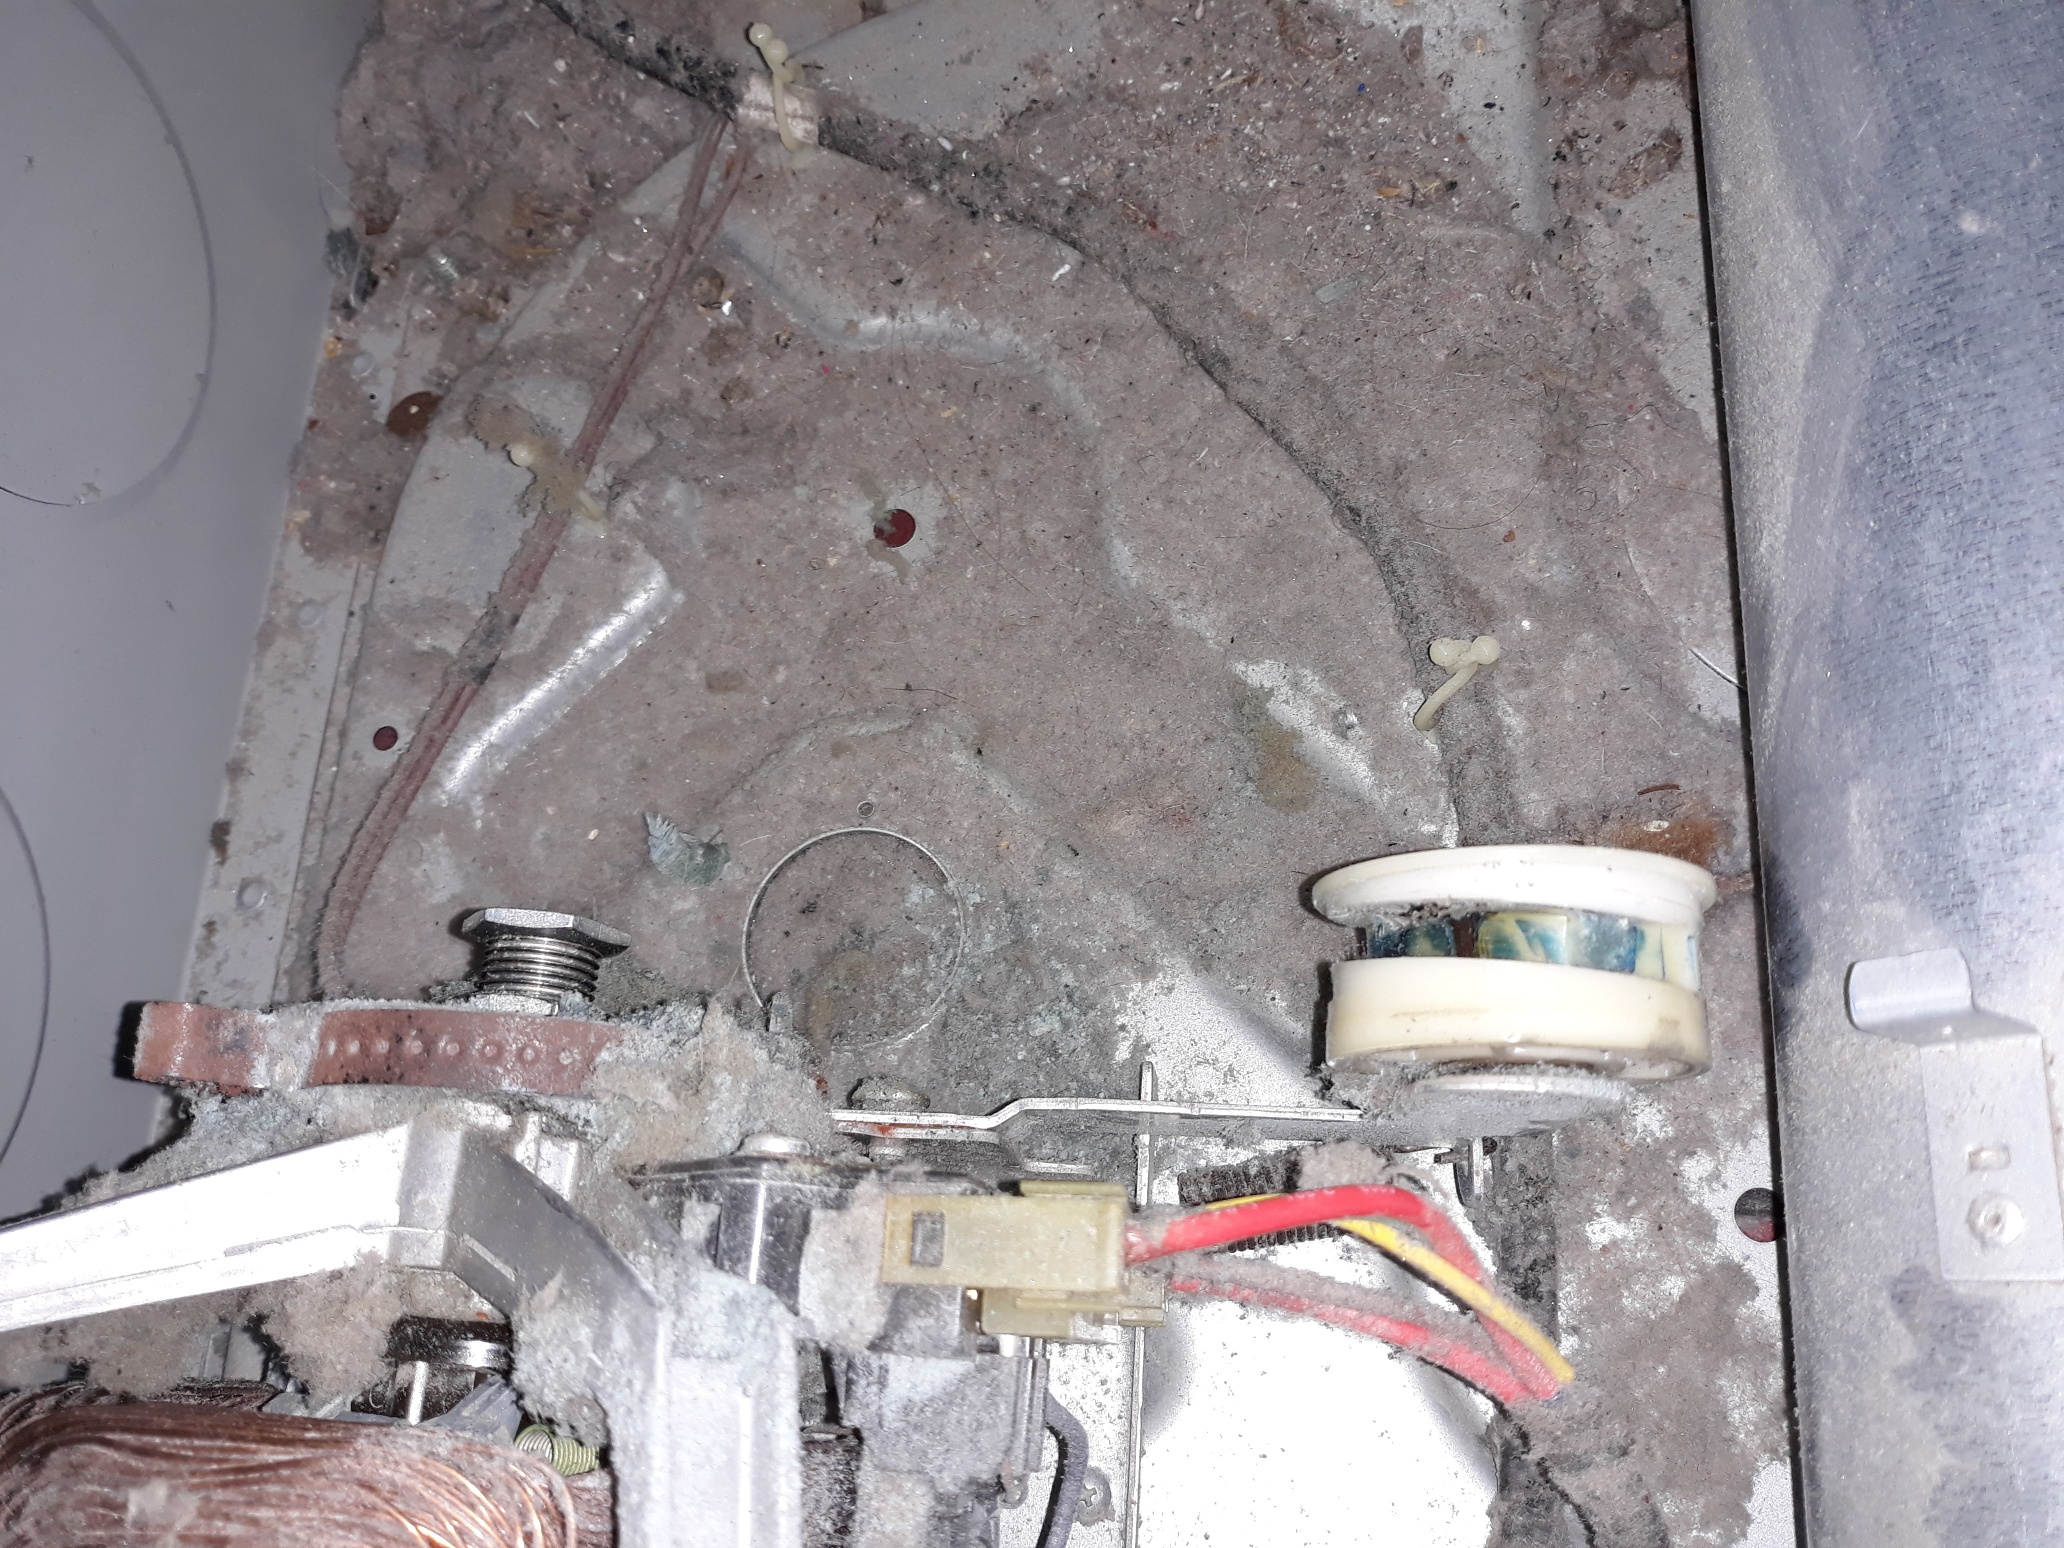 appliance repair dryer repair repaired by replacing the bad heating element mizell st coleman wildwood fl 34785